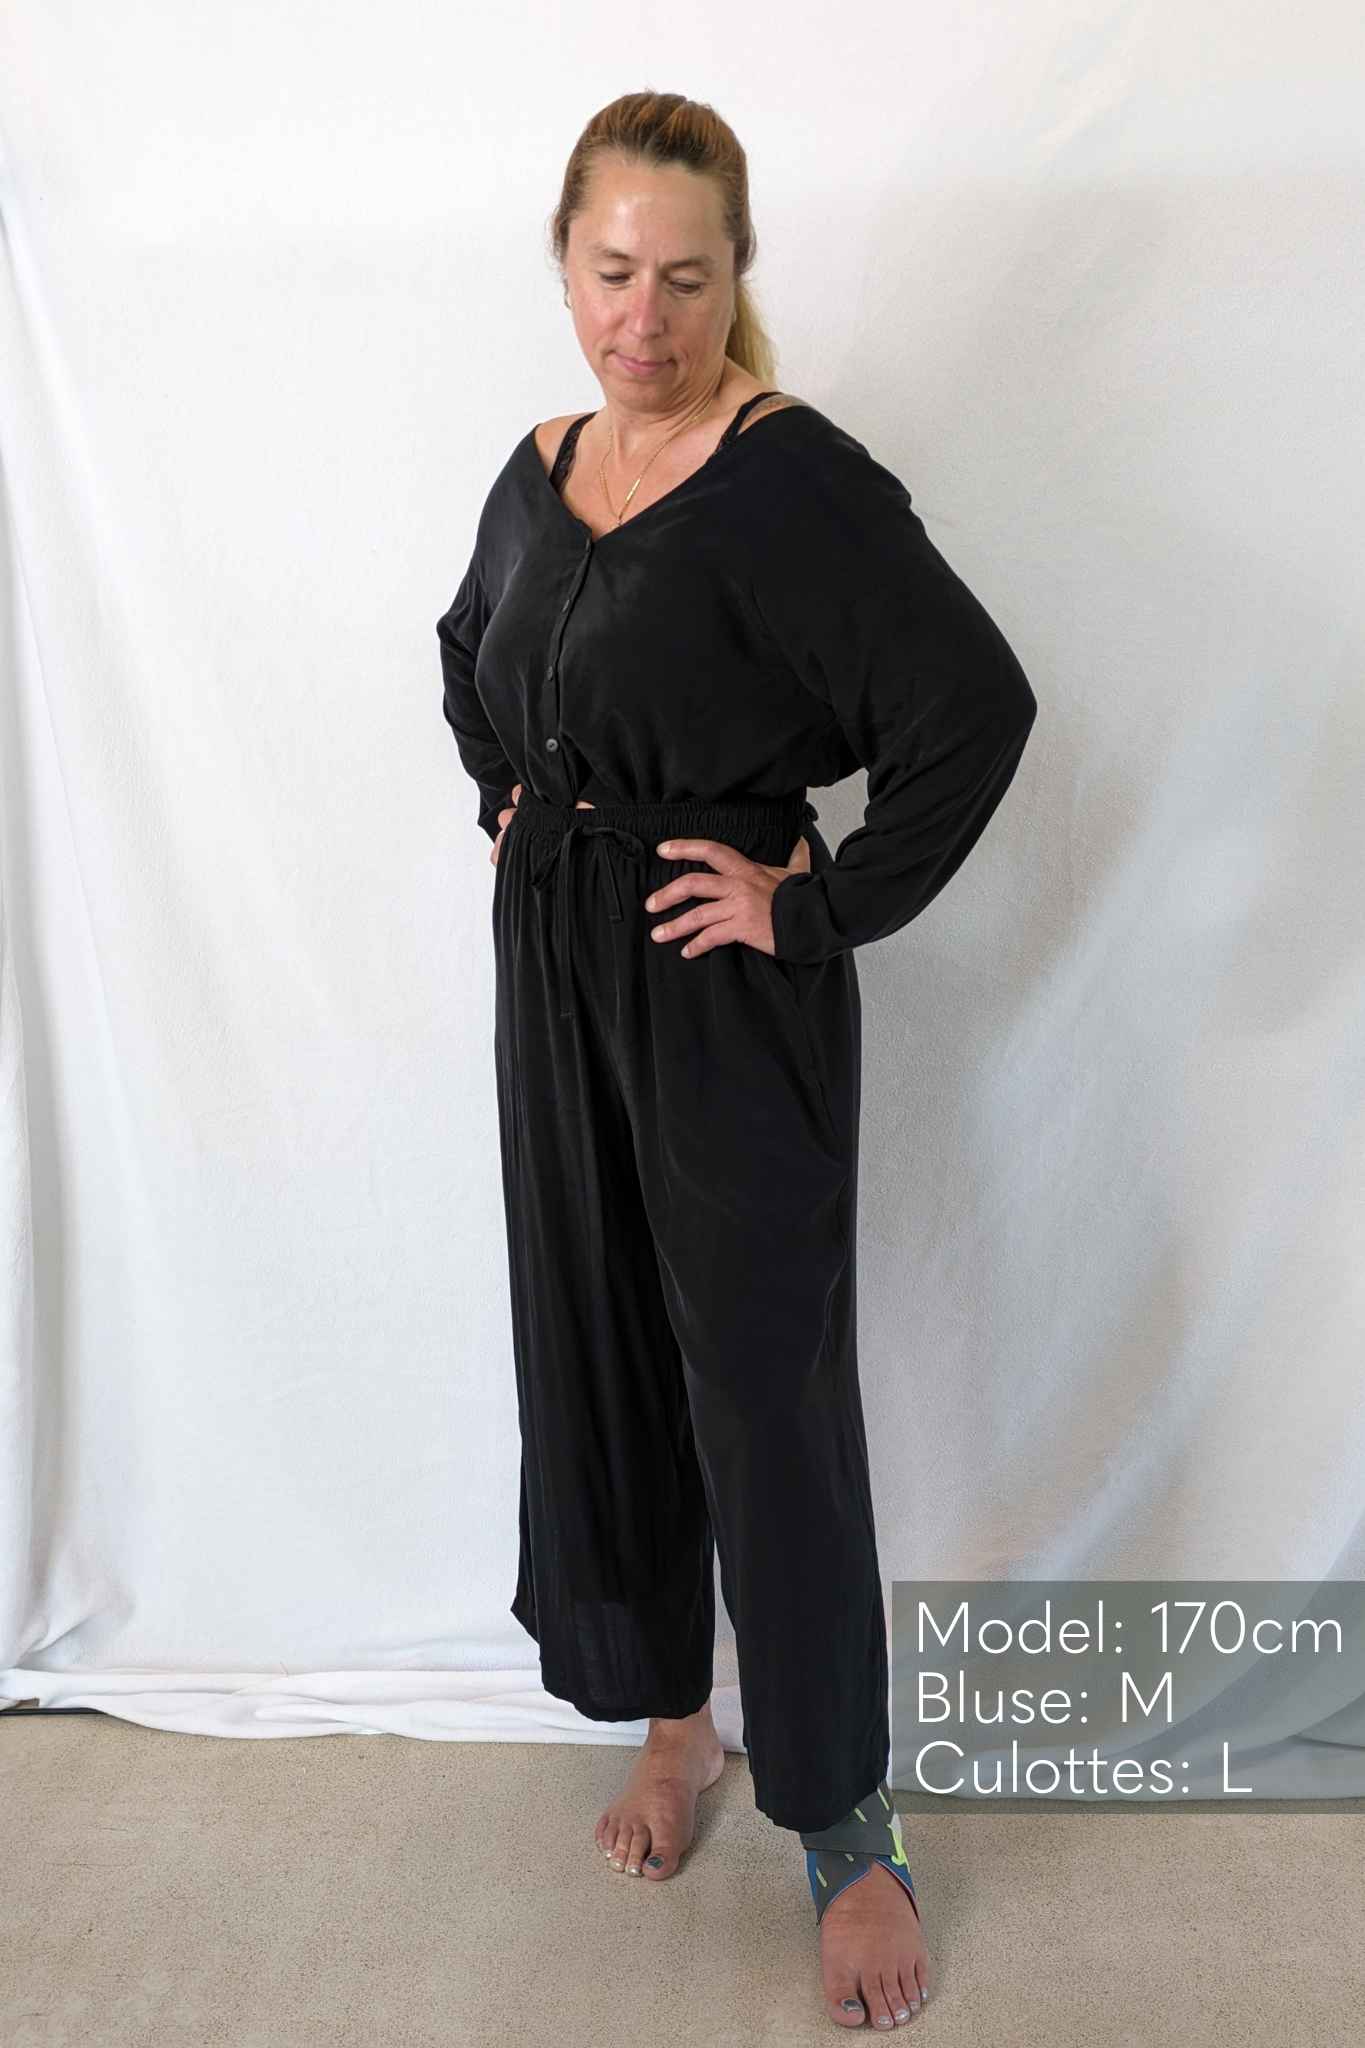 Woman wearing black pyjamas against a white background.